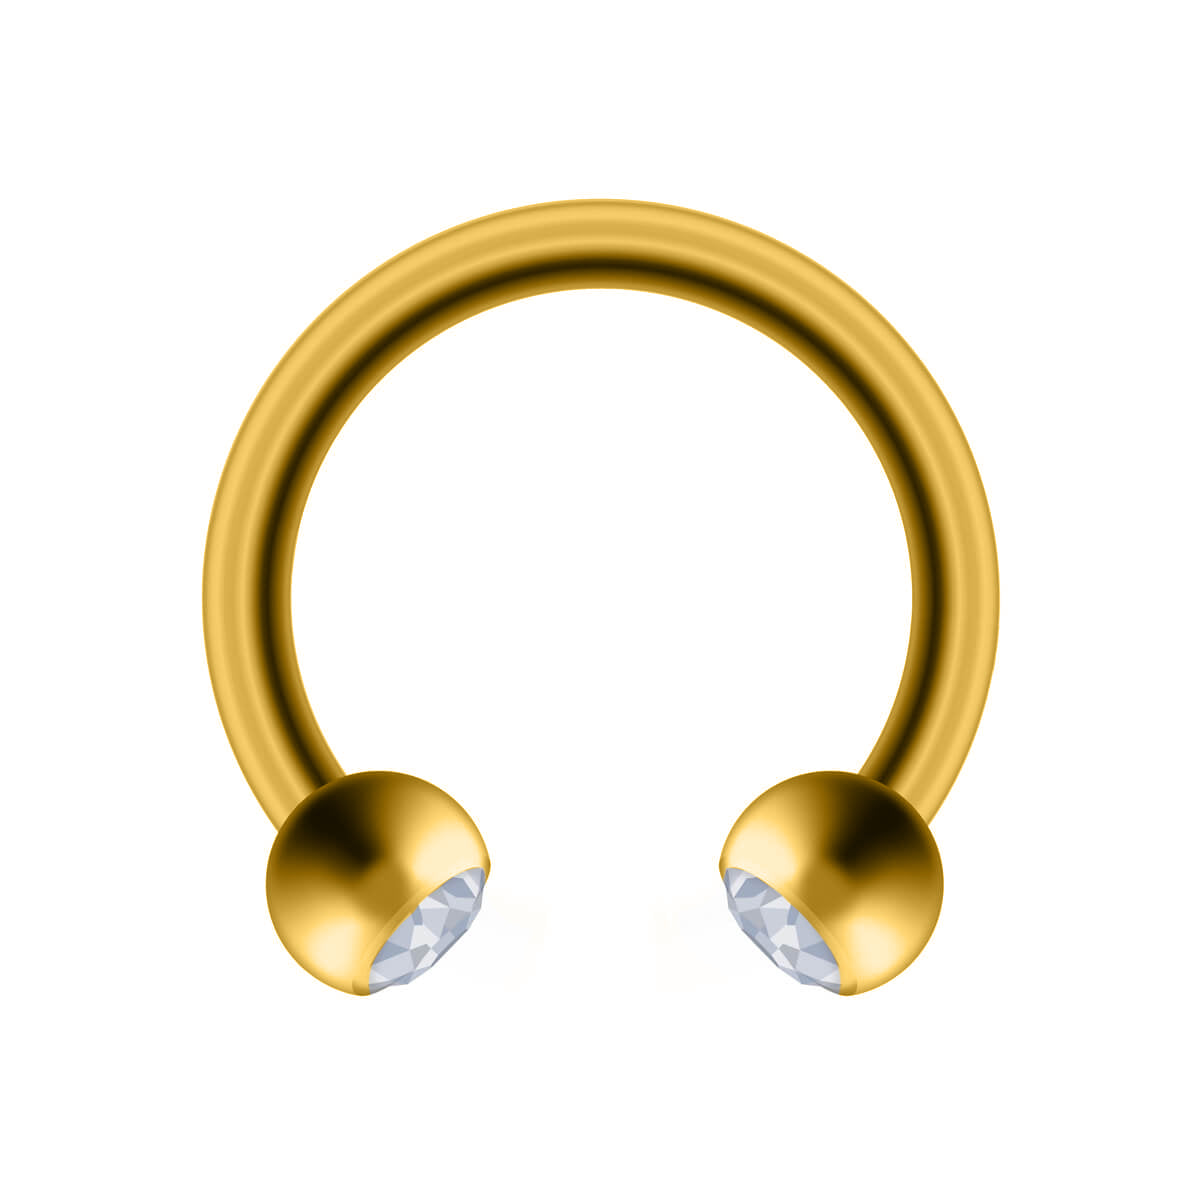 Horseshoe with gold plated stones 1.2mm (steel 316L)